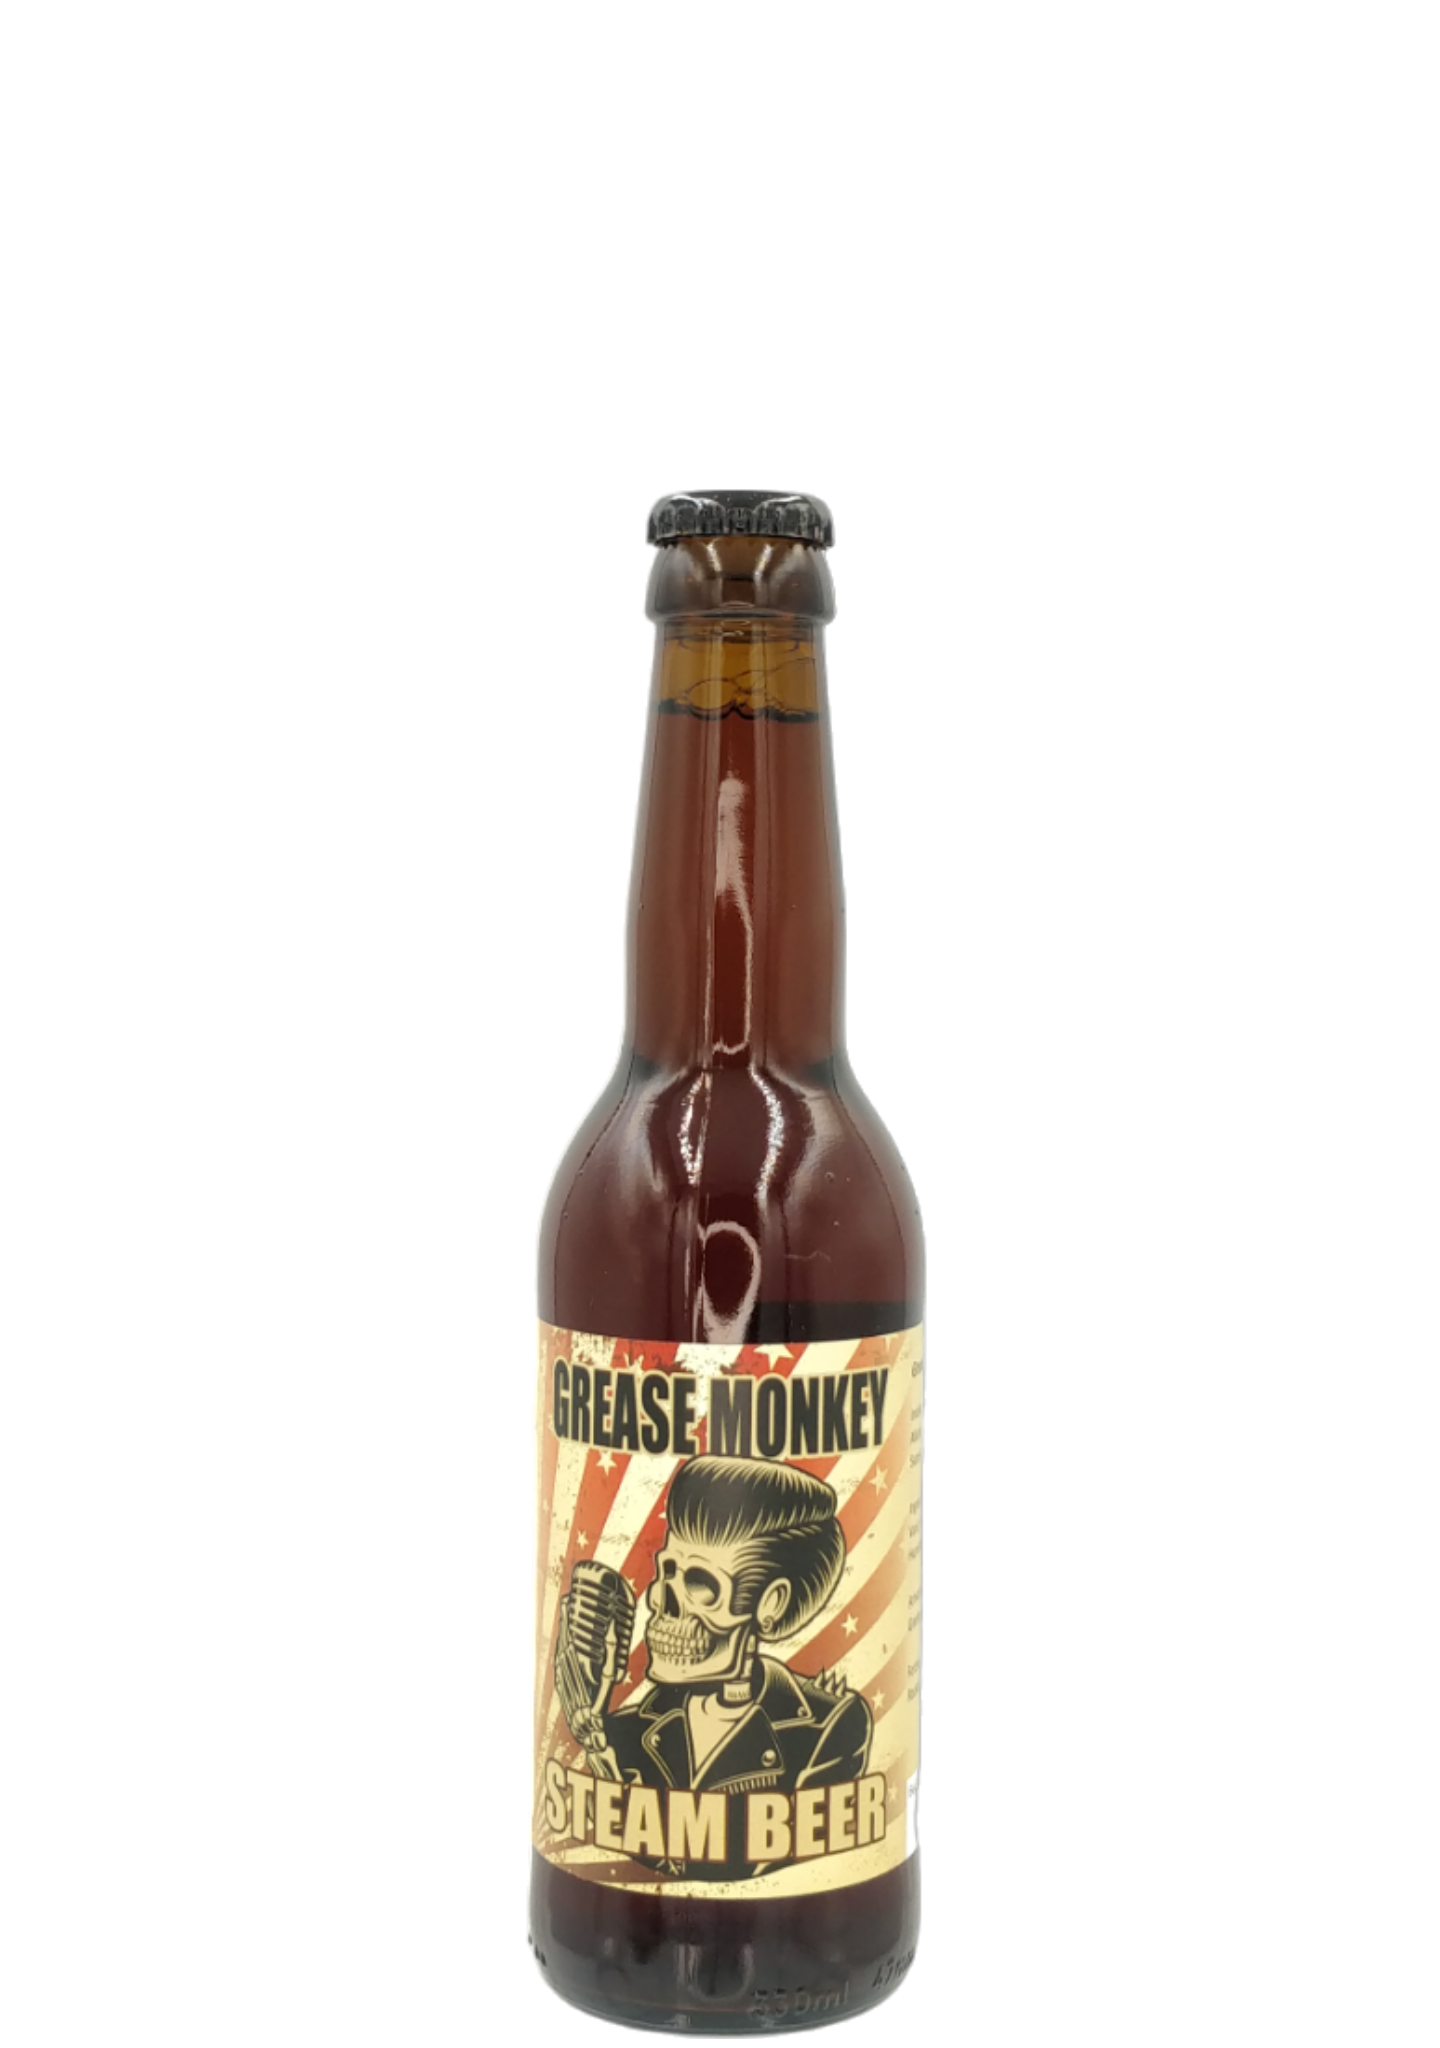 Grease Monkey Steam Beer 5% 33cl